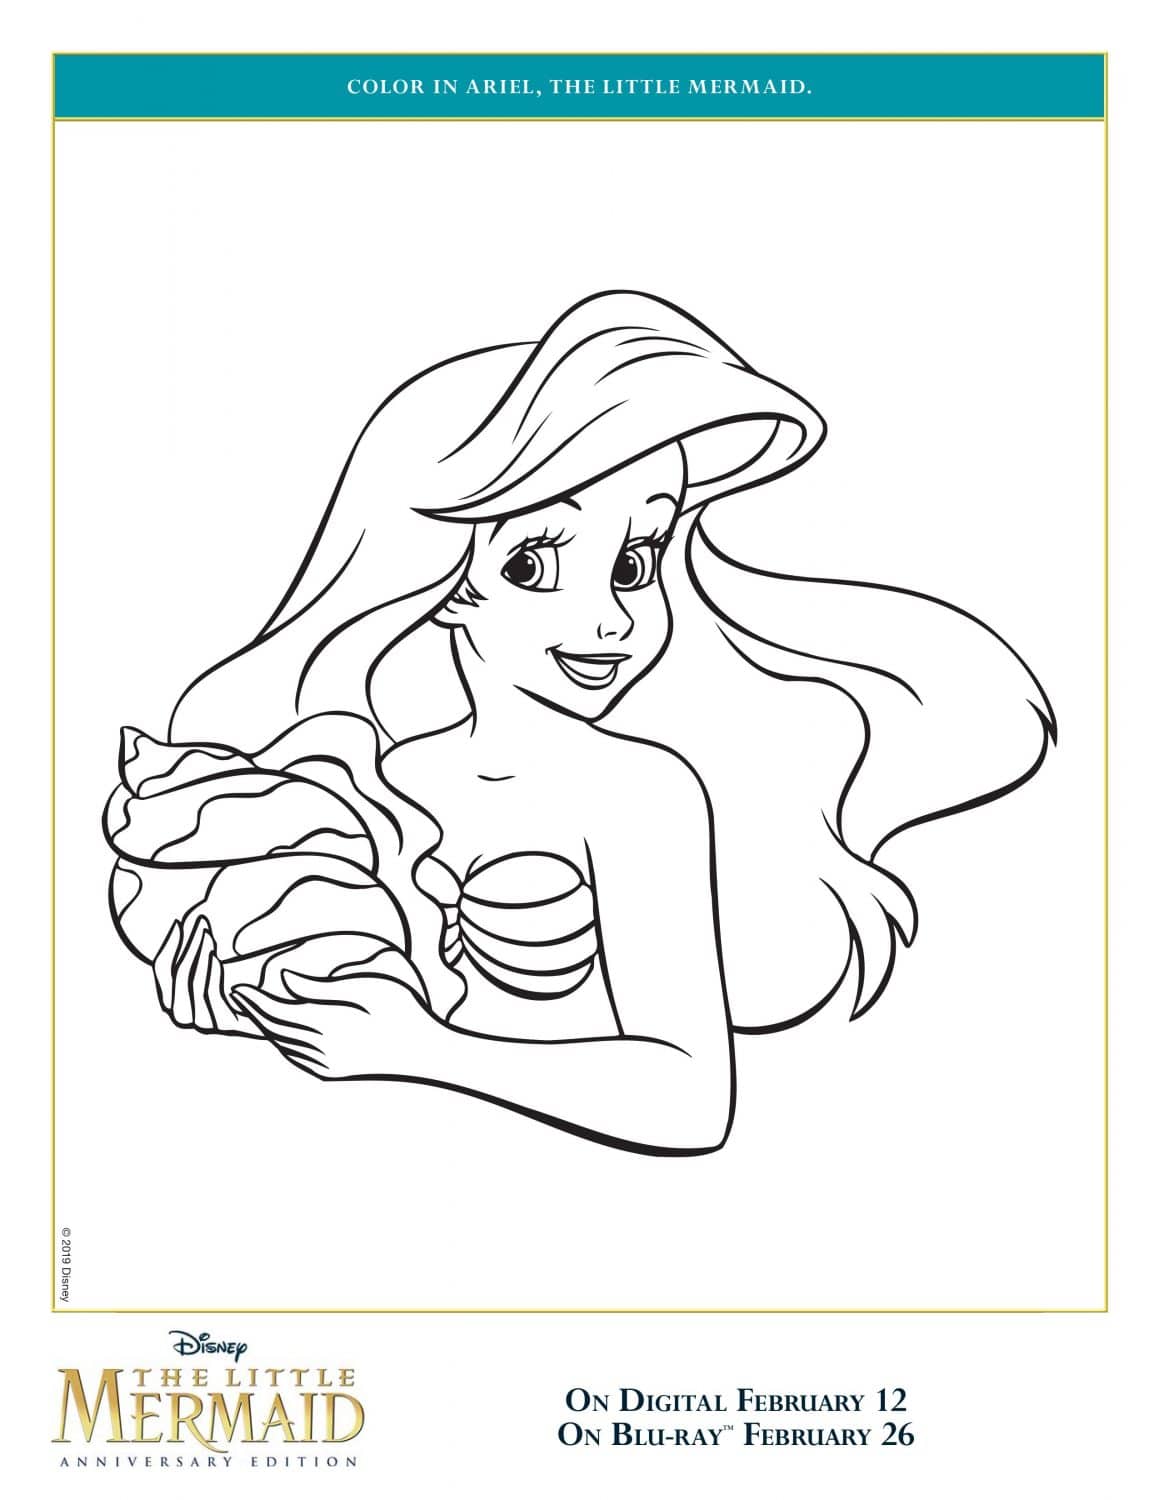 The Little Mermaid Coloring Pages and Activity Sheets | Crazy Adventures in  Parenting